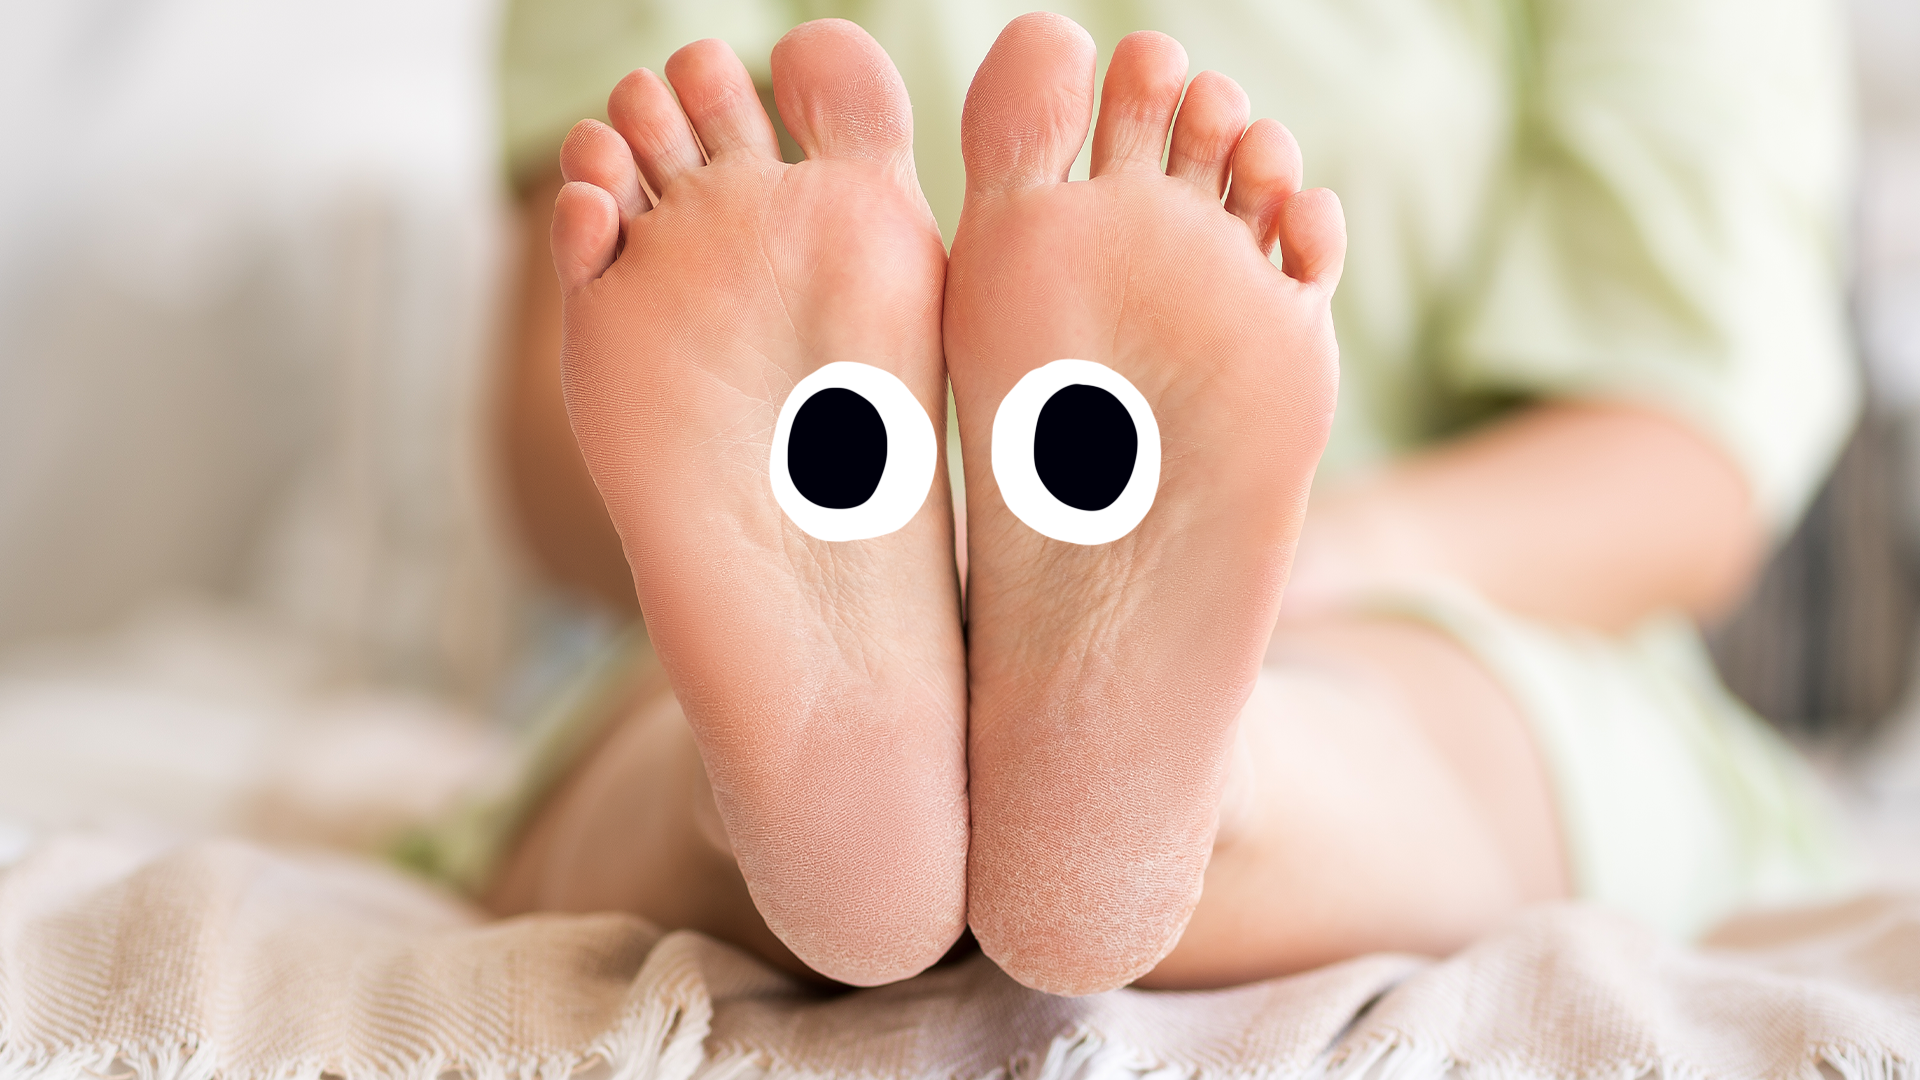 Some feet with eyes